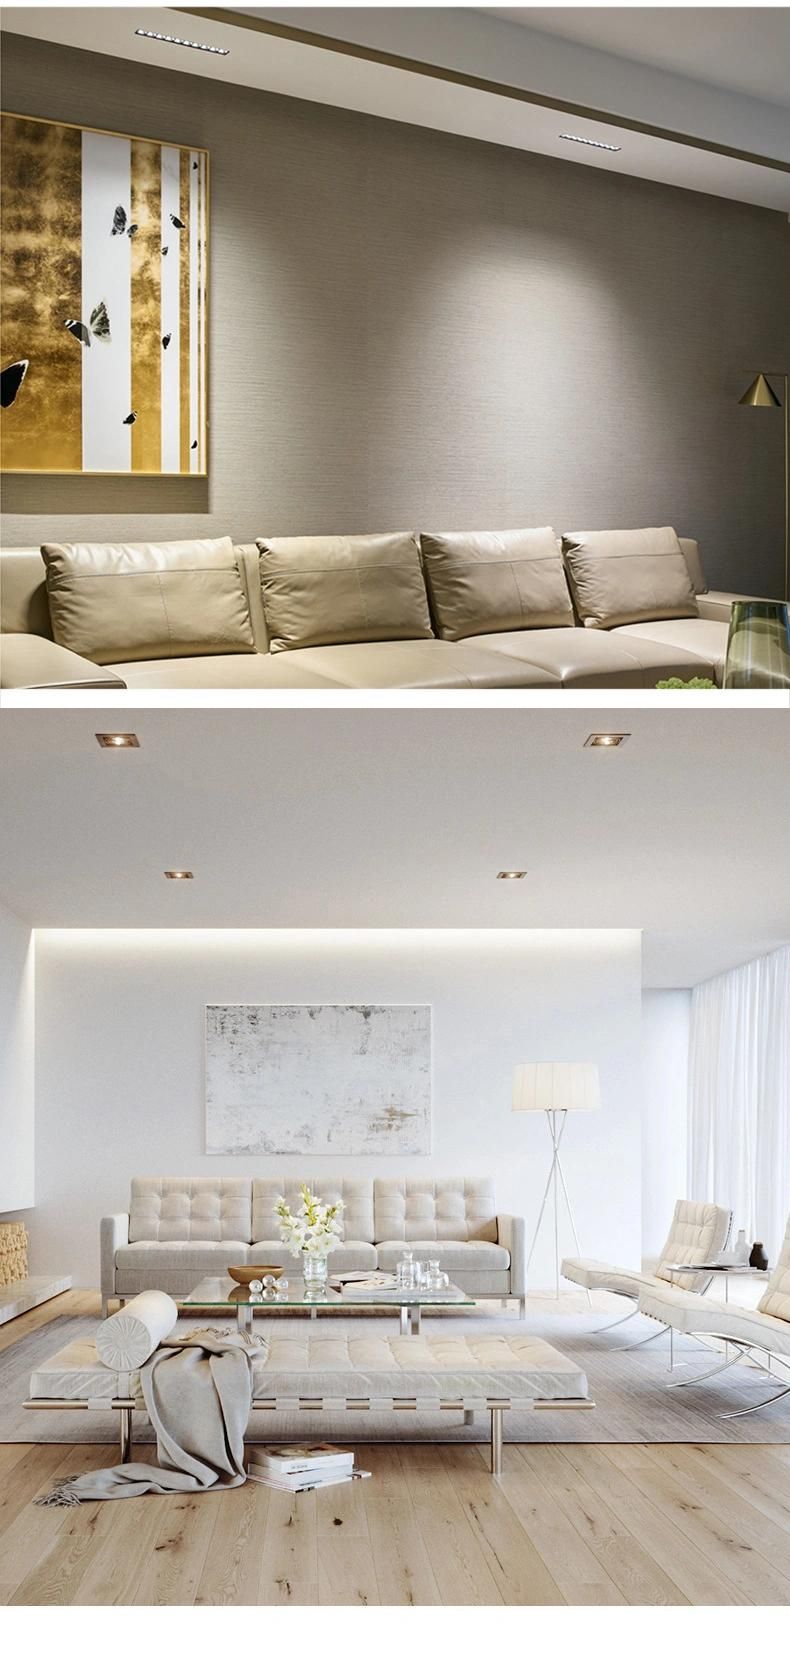 Us Standard LED Retrofit Recessed Ceiling Linear Down Light with Pressing to Replace The Light Source